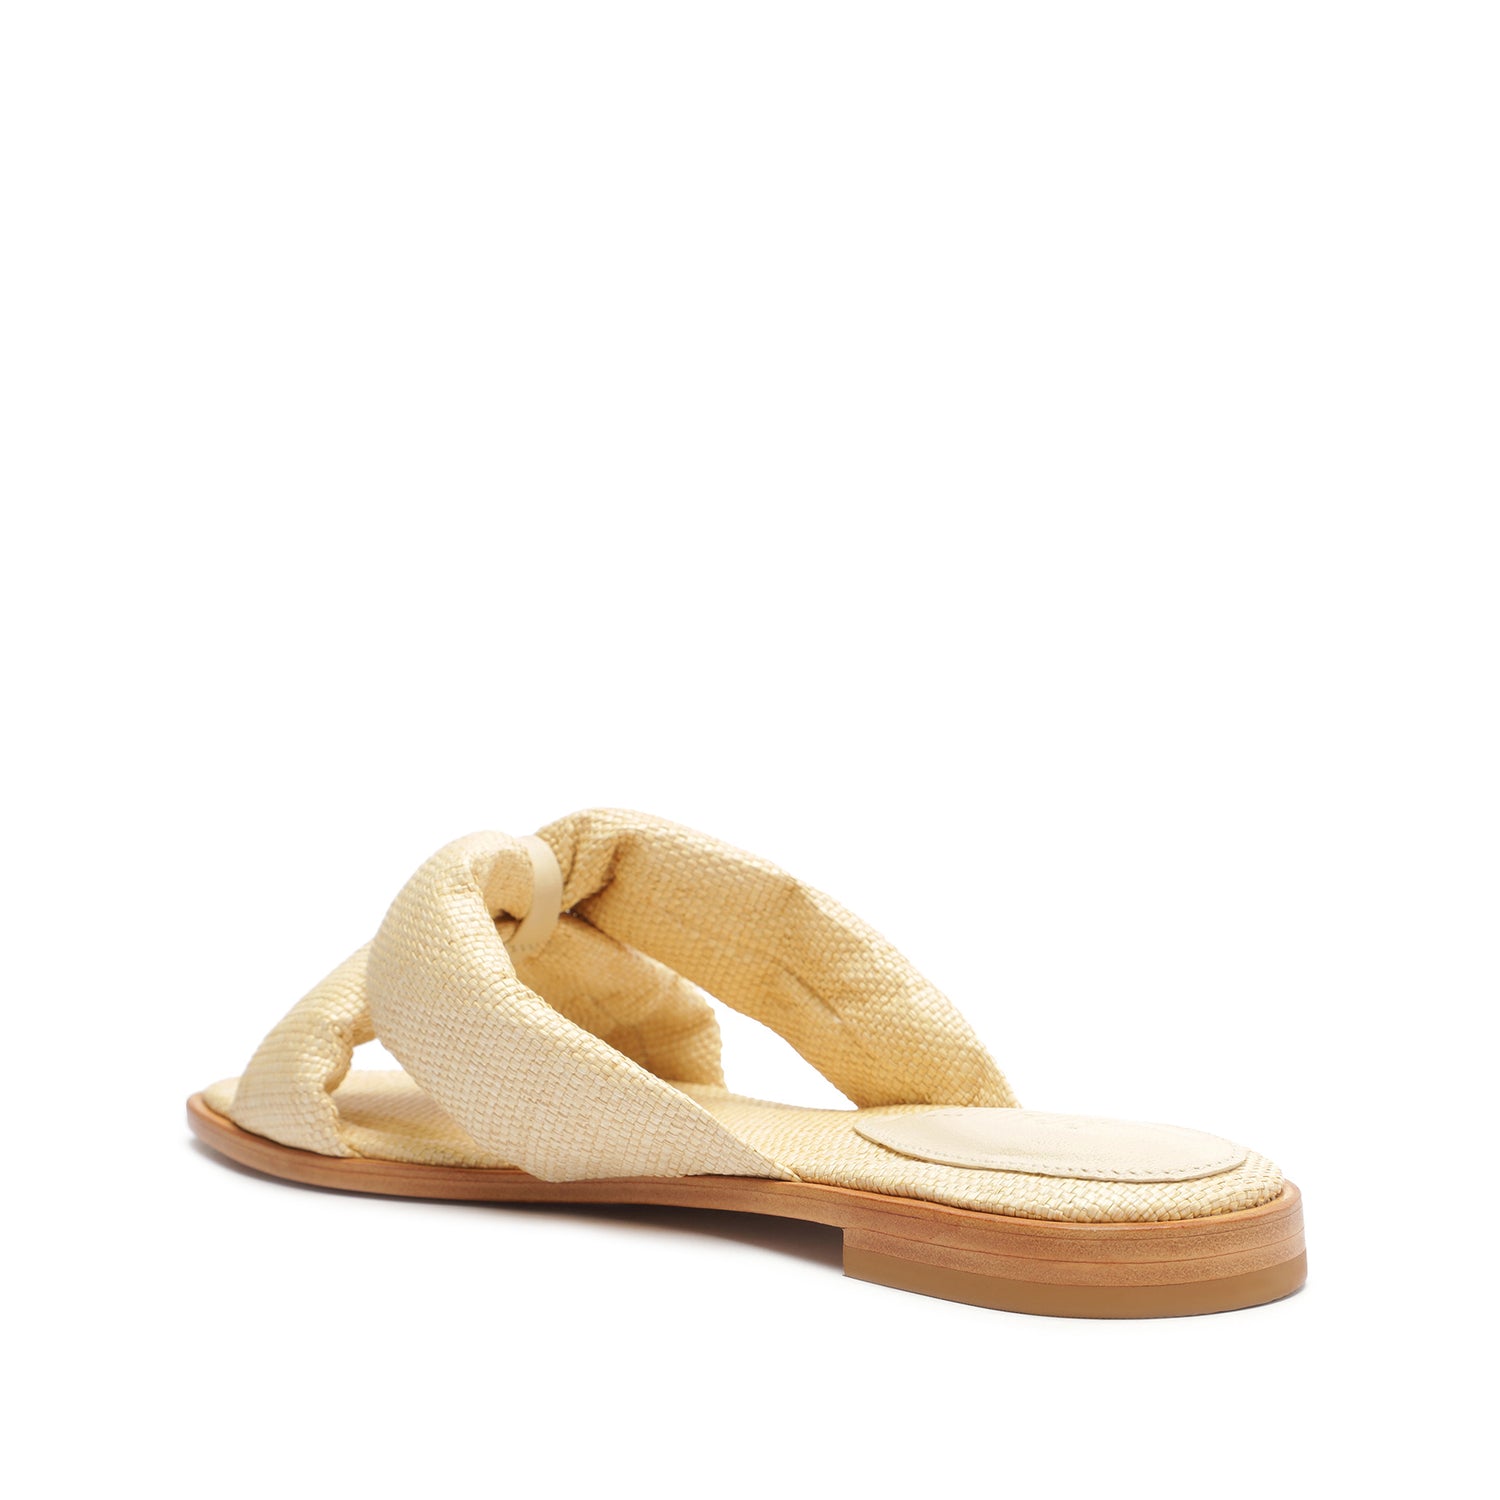 Fairy Casual Straw & Nappa Leather Sandal Eggshell Straw & Nappa Leather